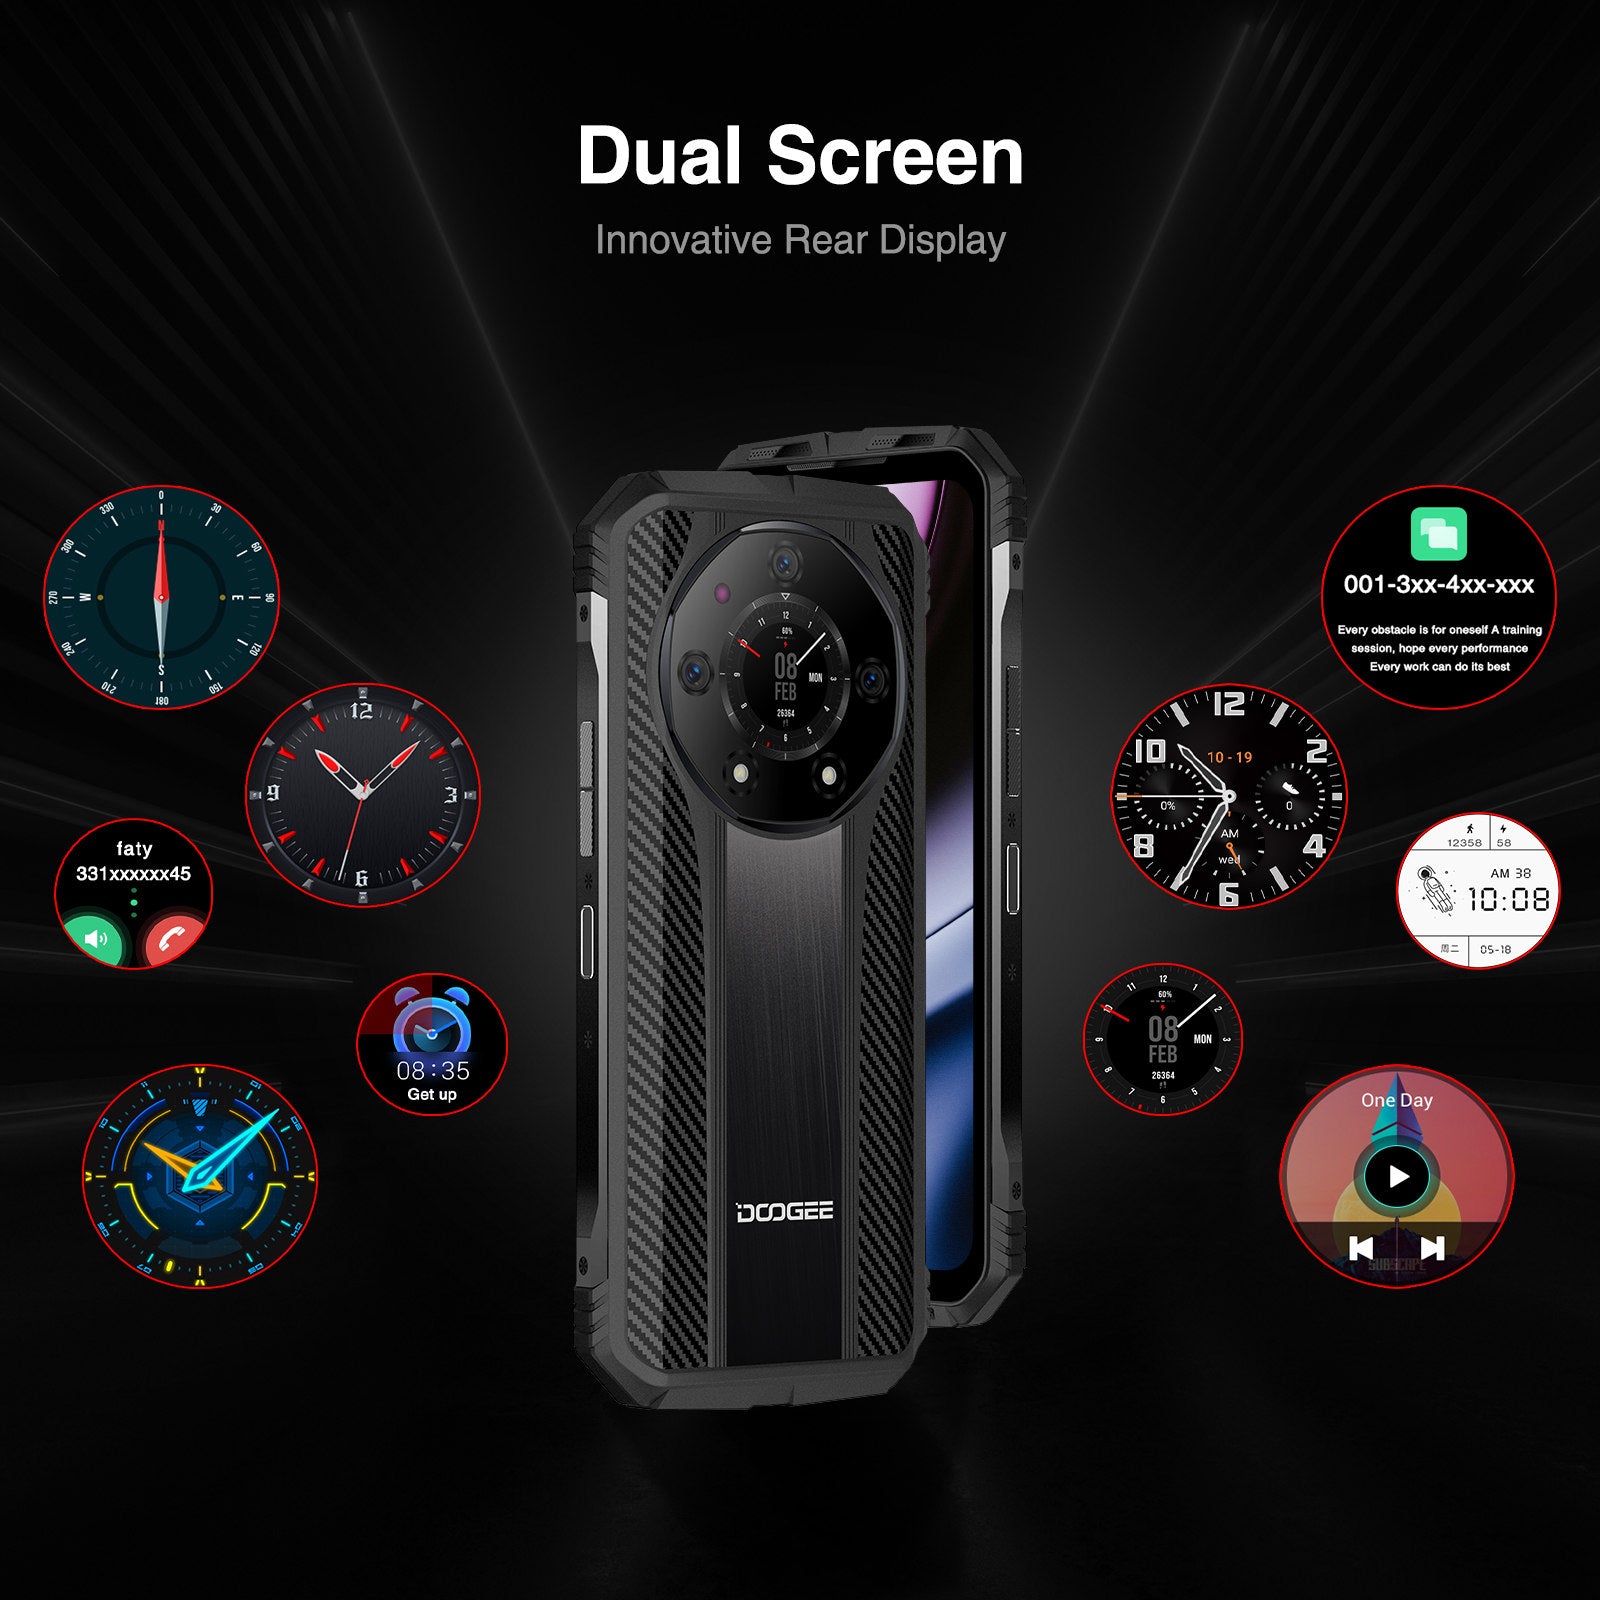 Doogee S110 with a secondary rear display is unveiled